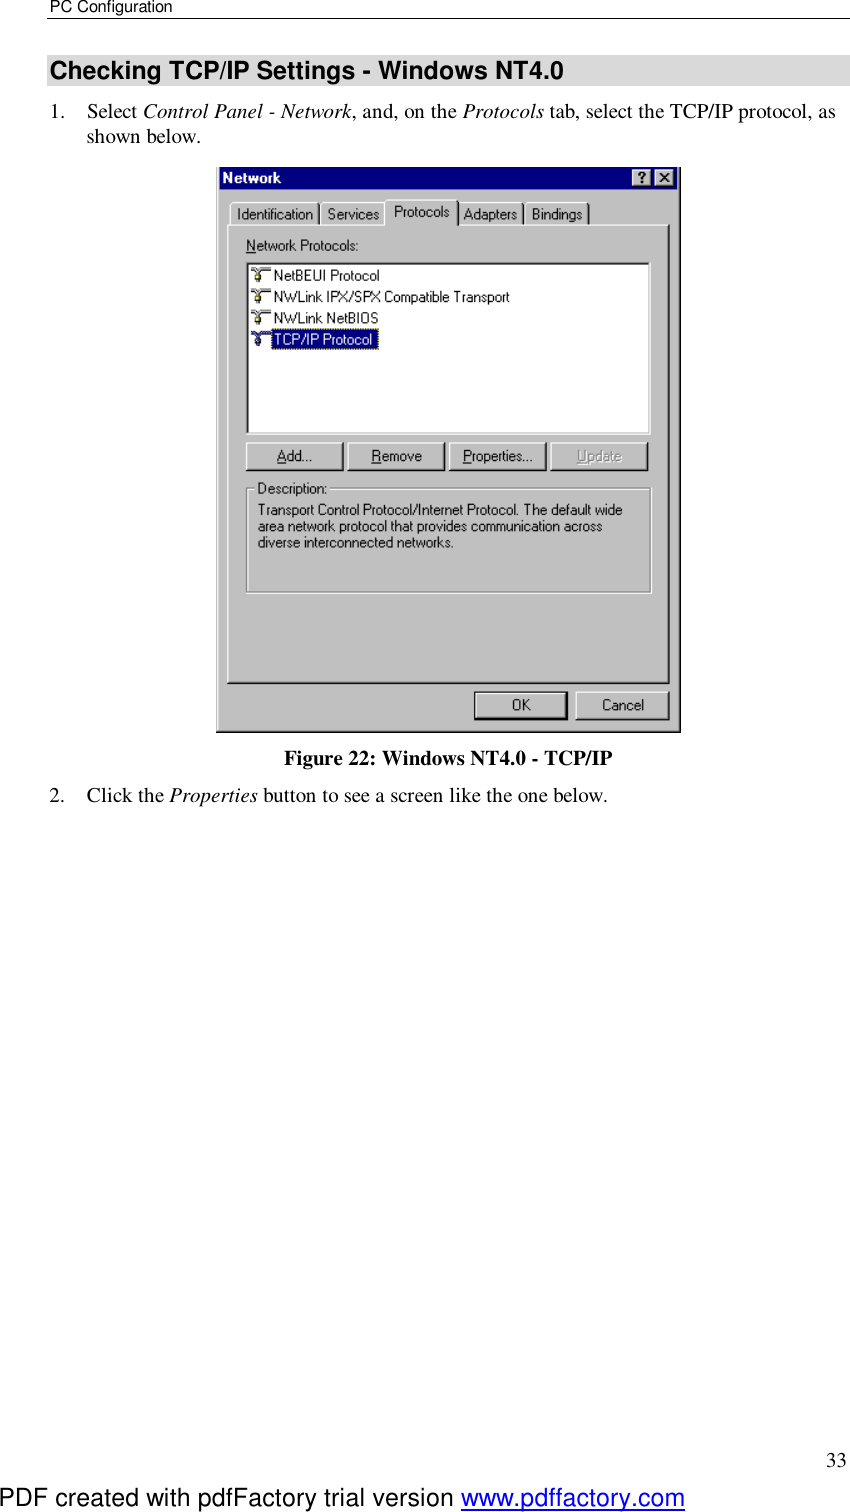 PC Configuration 33 Checking TCP/IP Settings - Windows NT4.0 1. Select Control Panel - Network, and, on the Protocols tab, select the TCP/IP protocol, as shown below.  Figure 22: Windows NT4.0 - TCP/IP 2. Click the Properties button to see a screen like the one below. PDF created with pdfFactory trial version www.pdffactory.com